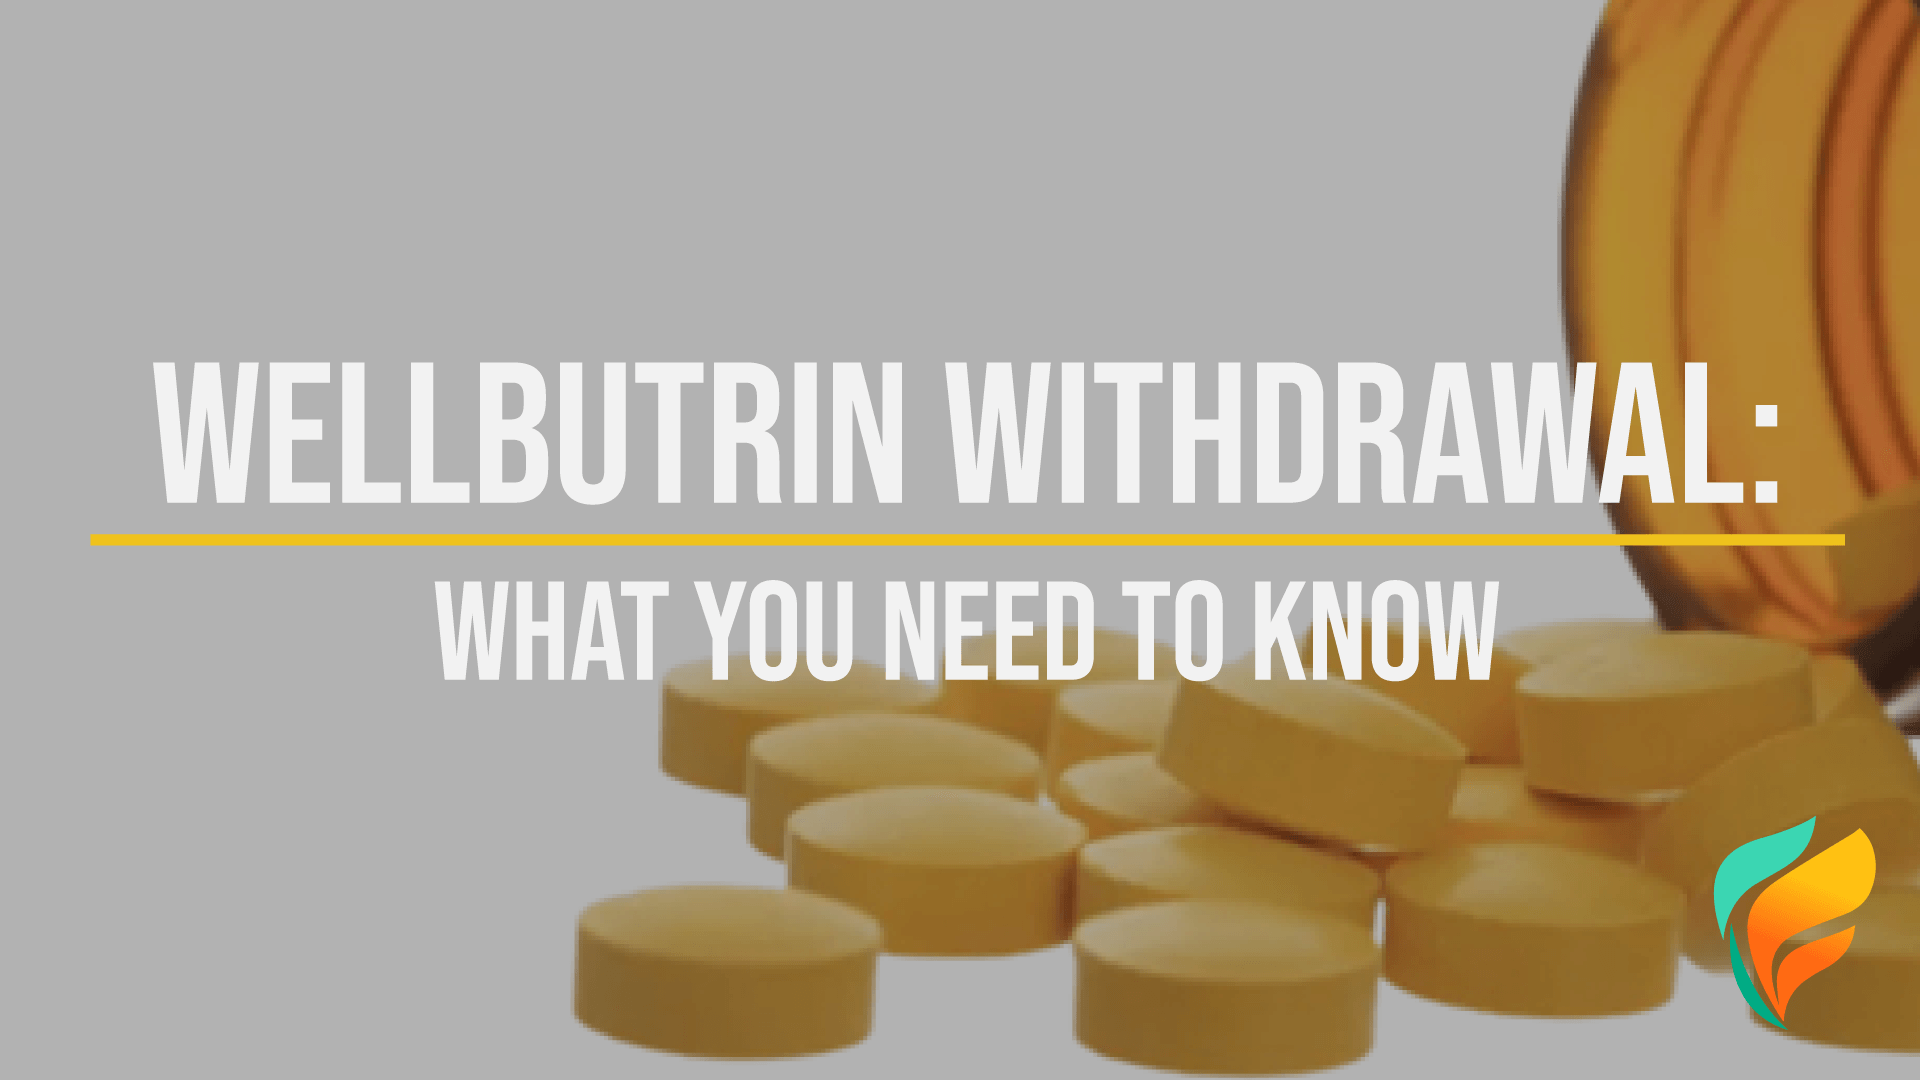 Wellbutrin Withdrawal Symptoms: What to Expect